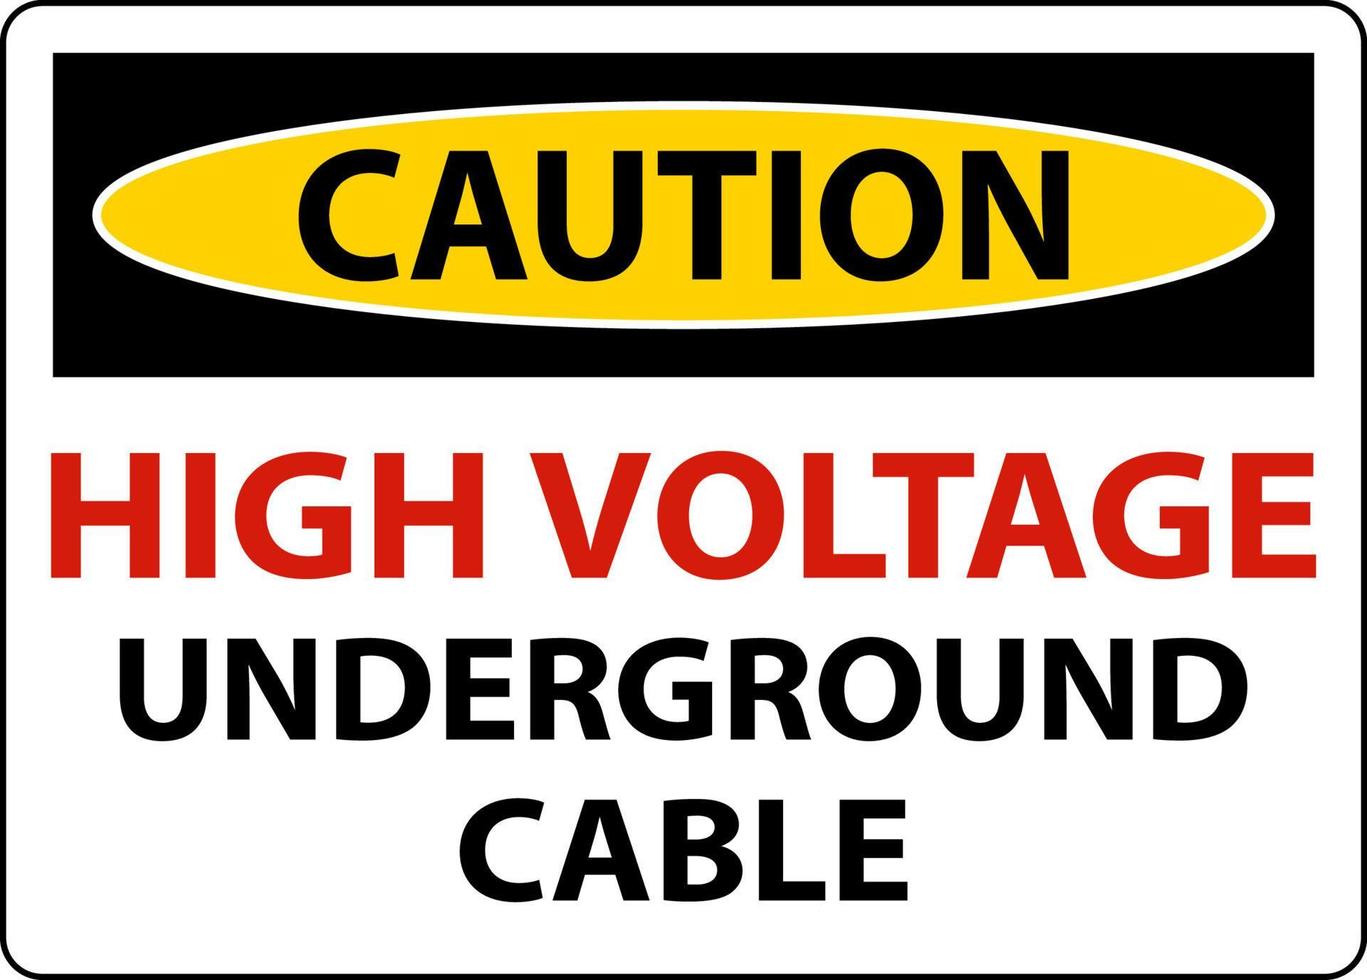 Caution High Voltage Cable Underground Sign On White Background vector